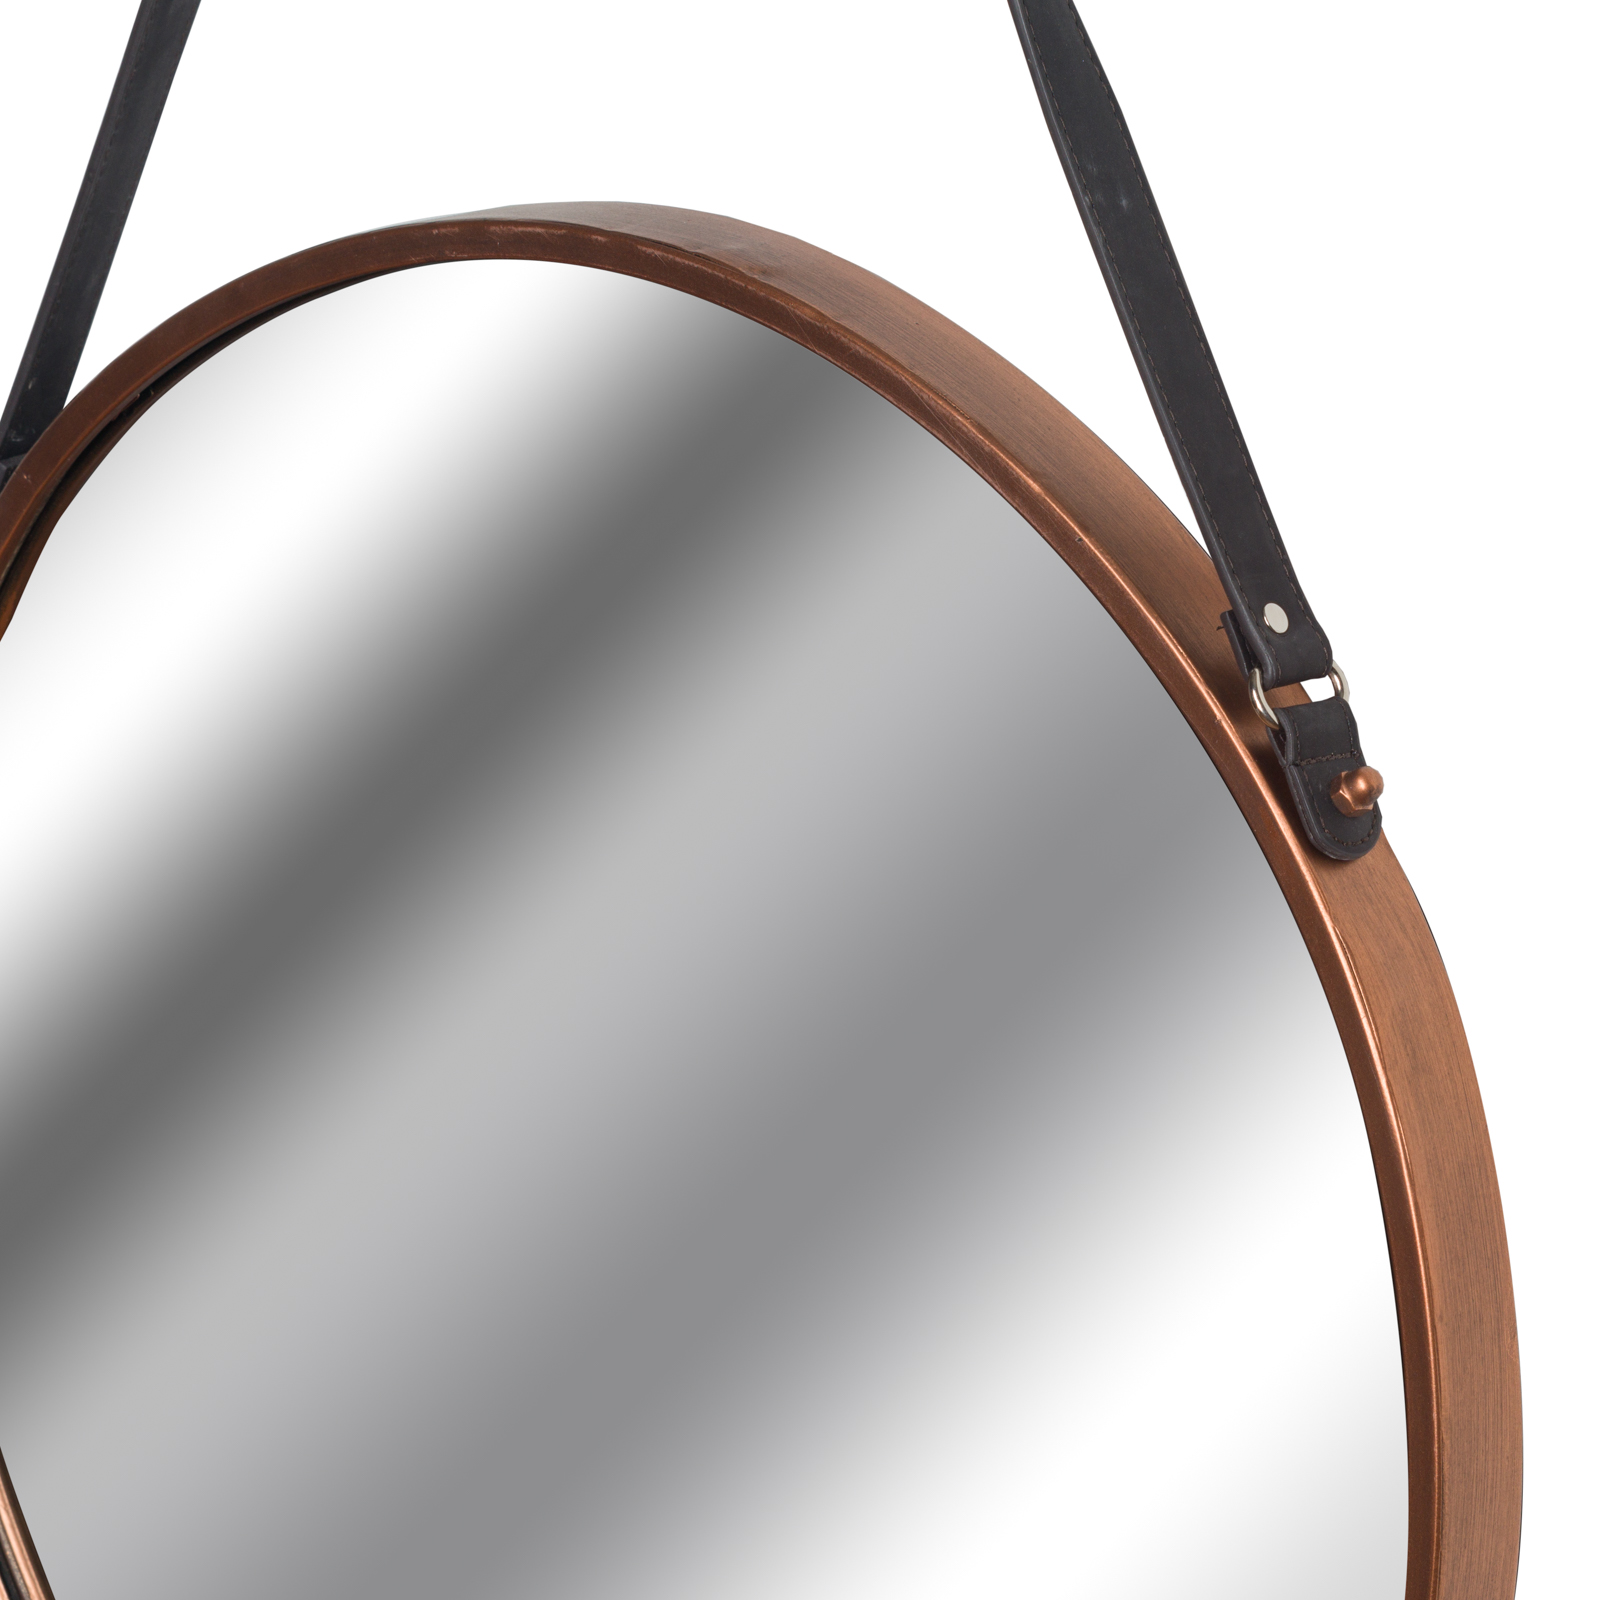 Copper Rimmed Round Hanging Wall Mirror With Black Strap - Image 3